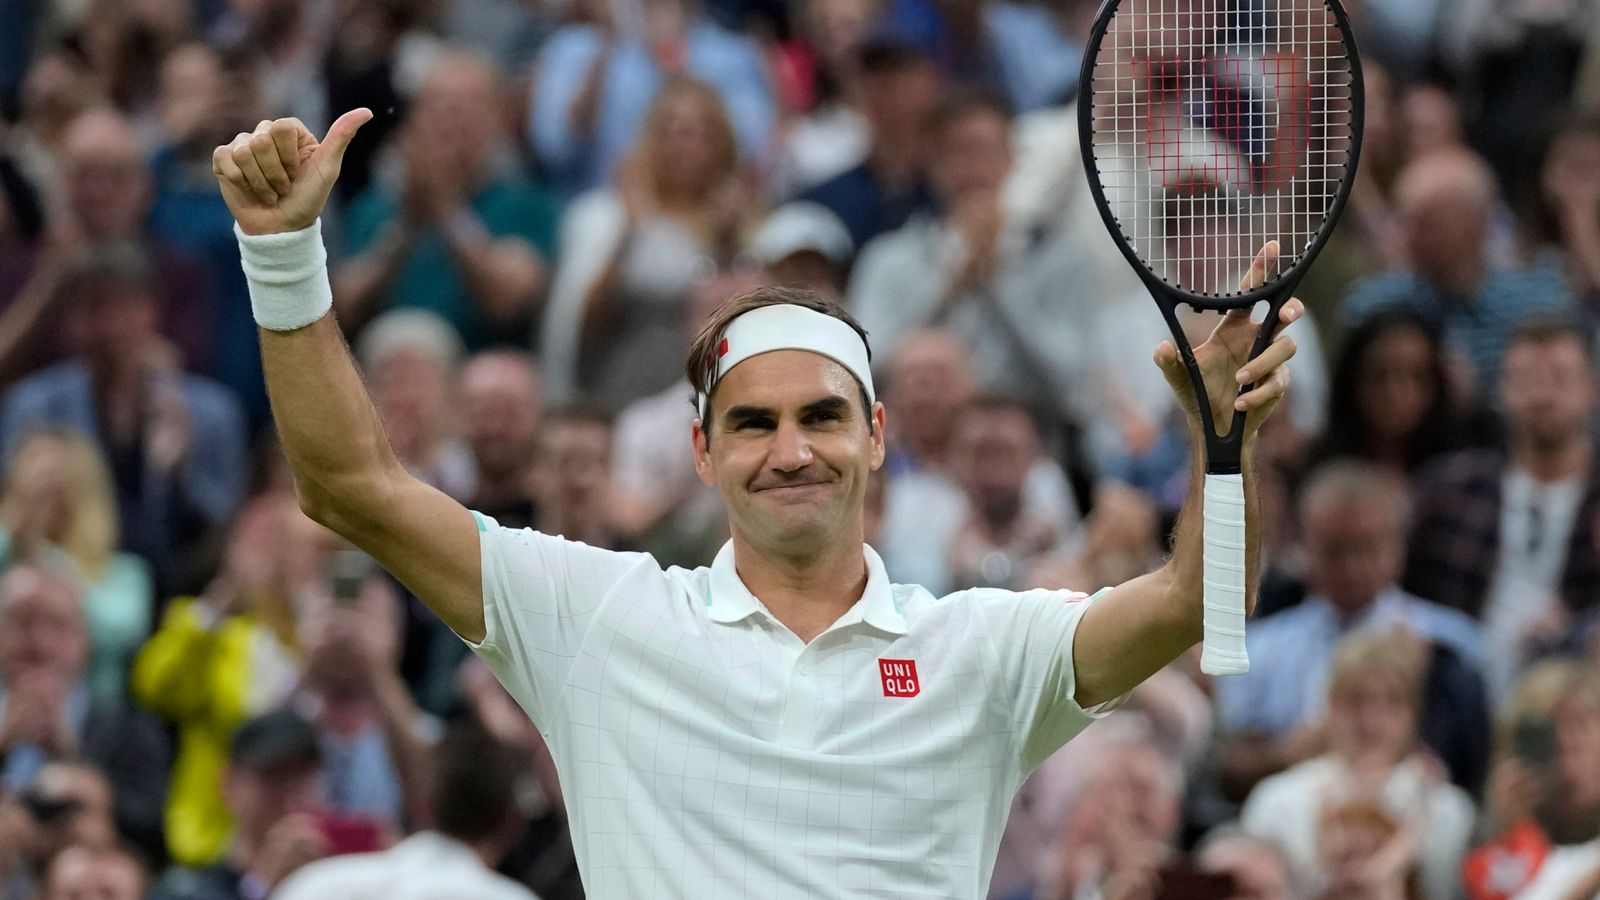 Wimbledon 2021: Roger Federer and Novak Djokovic had little trouble in fourth round victories